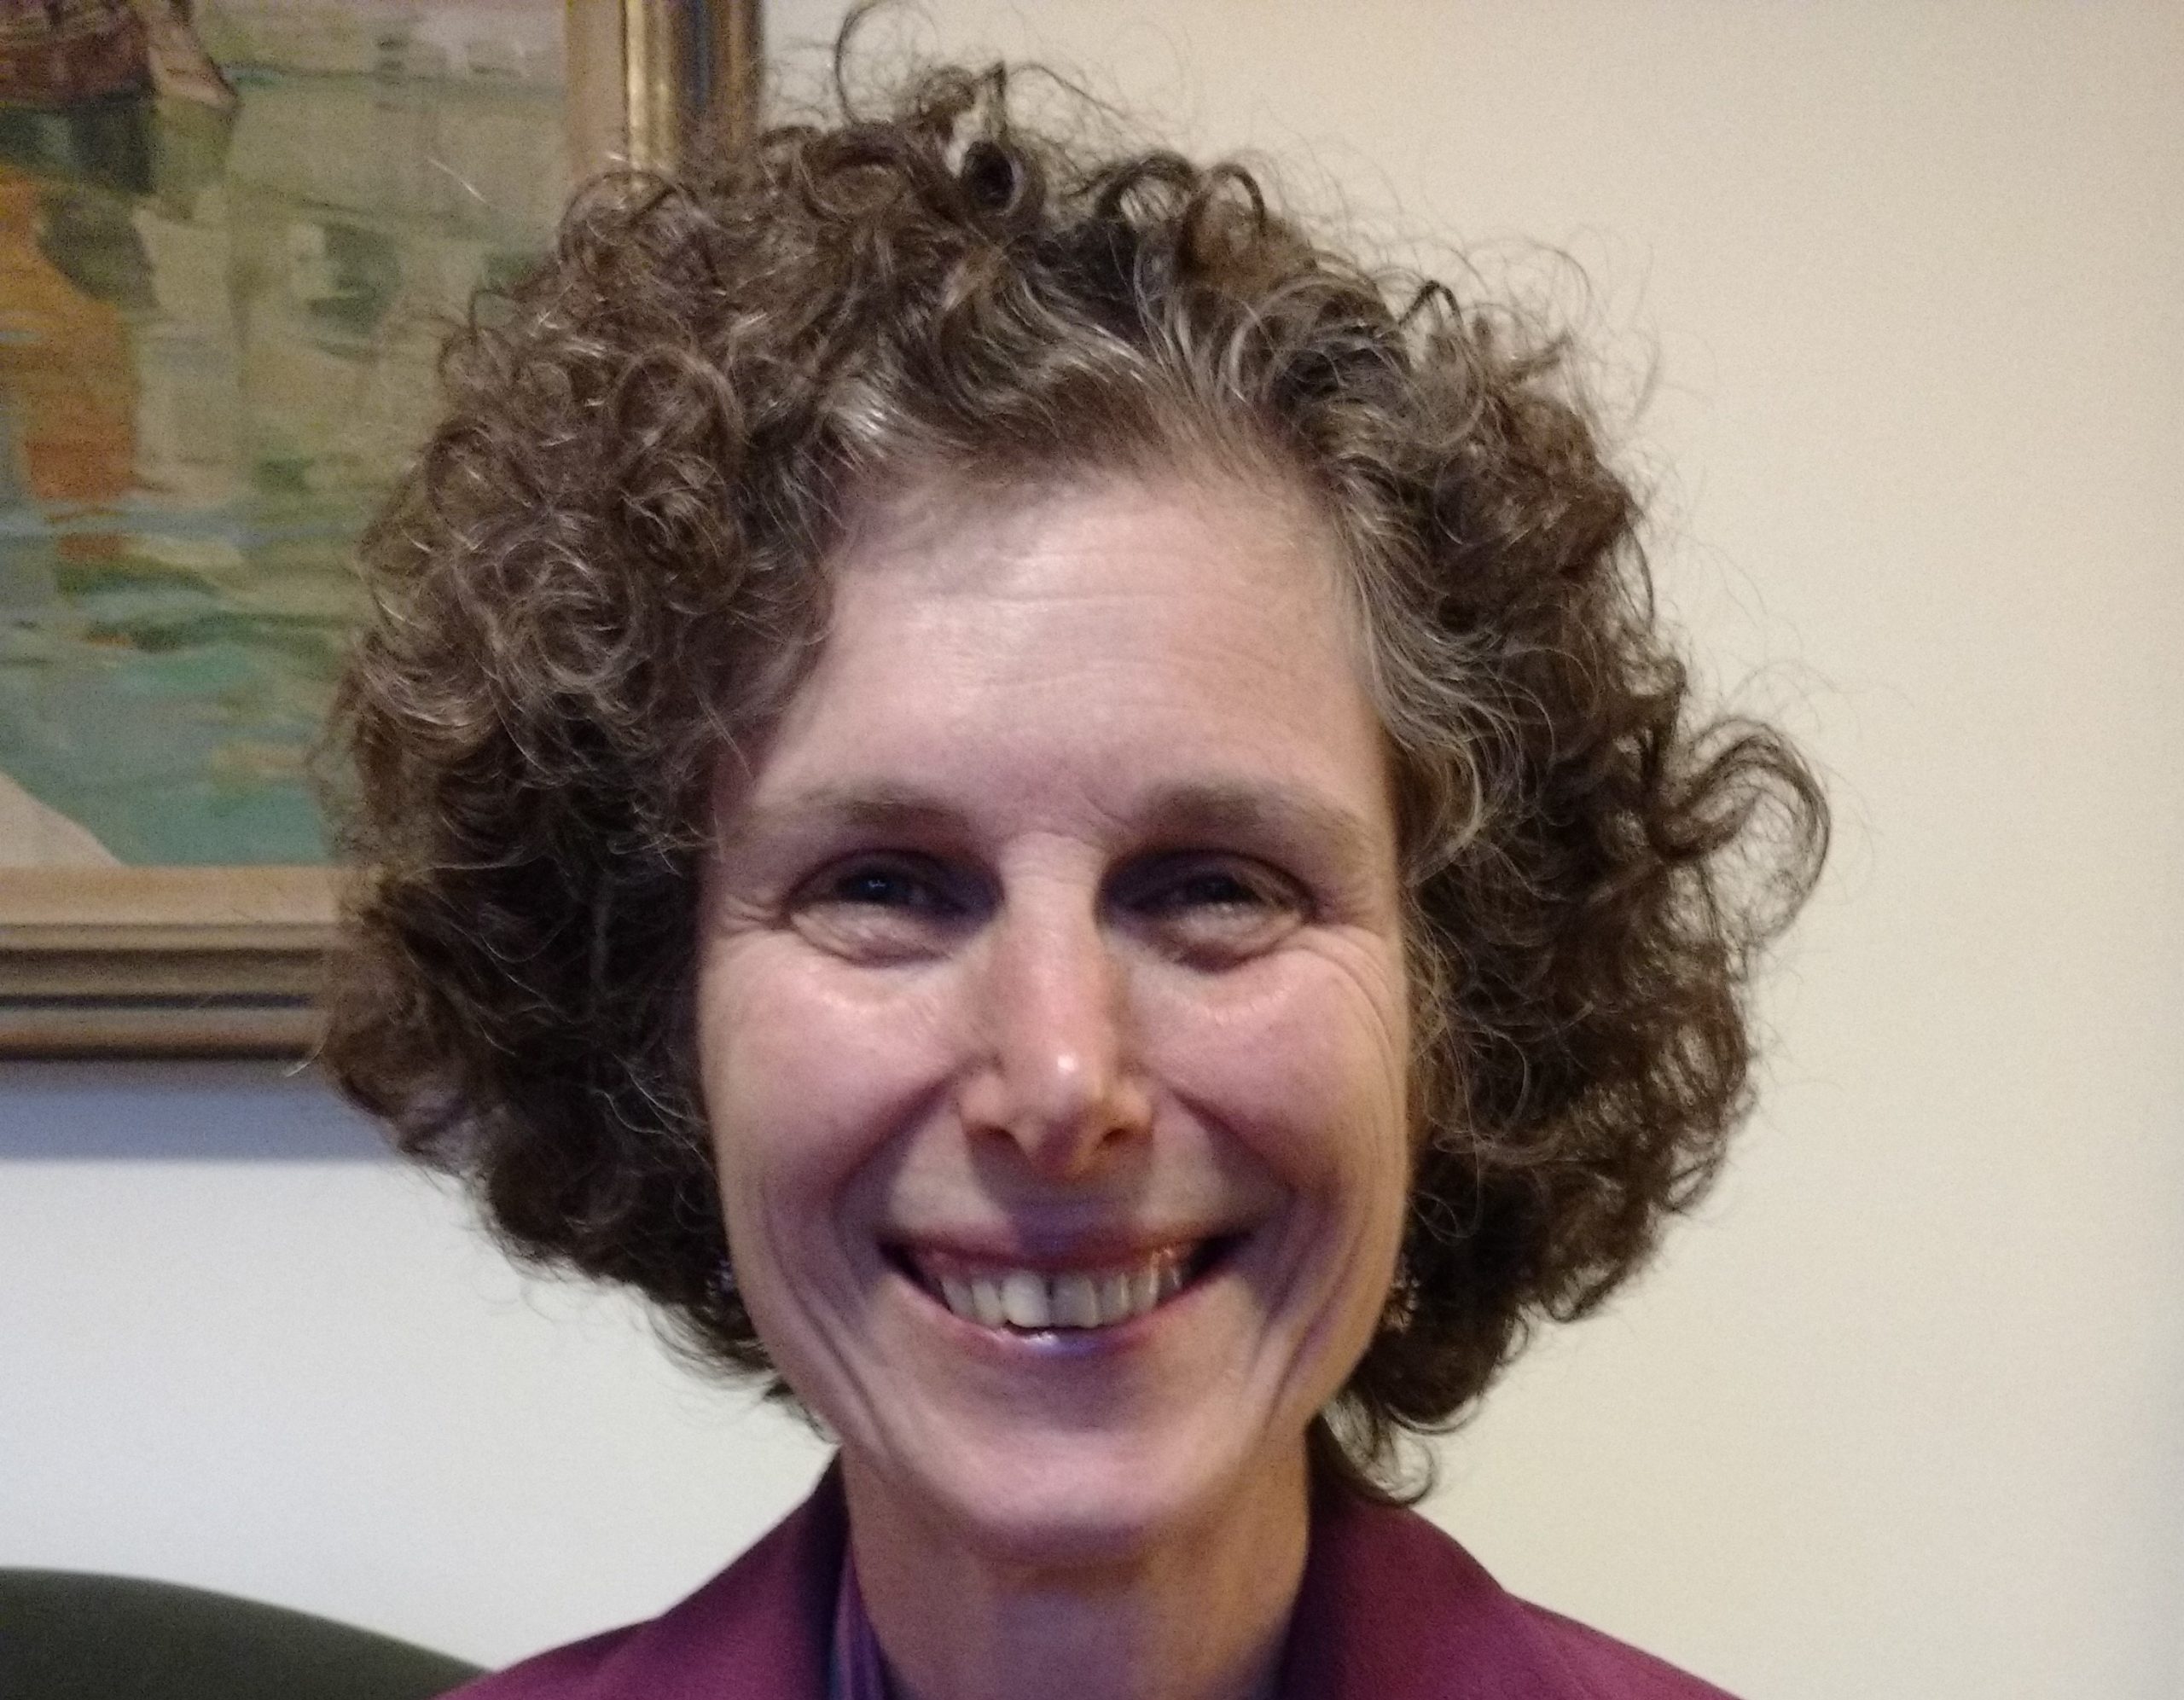 Photo of the author. White woman, medium length curly brown hair, staring directly at the camera and smiling broadly.